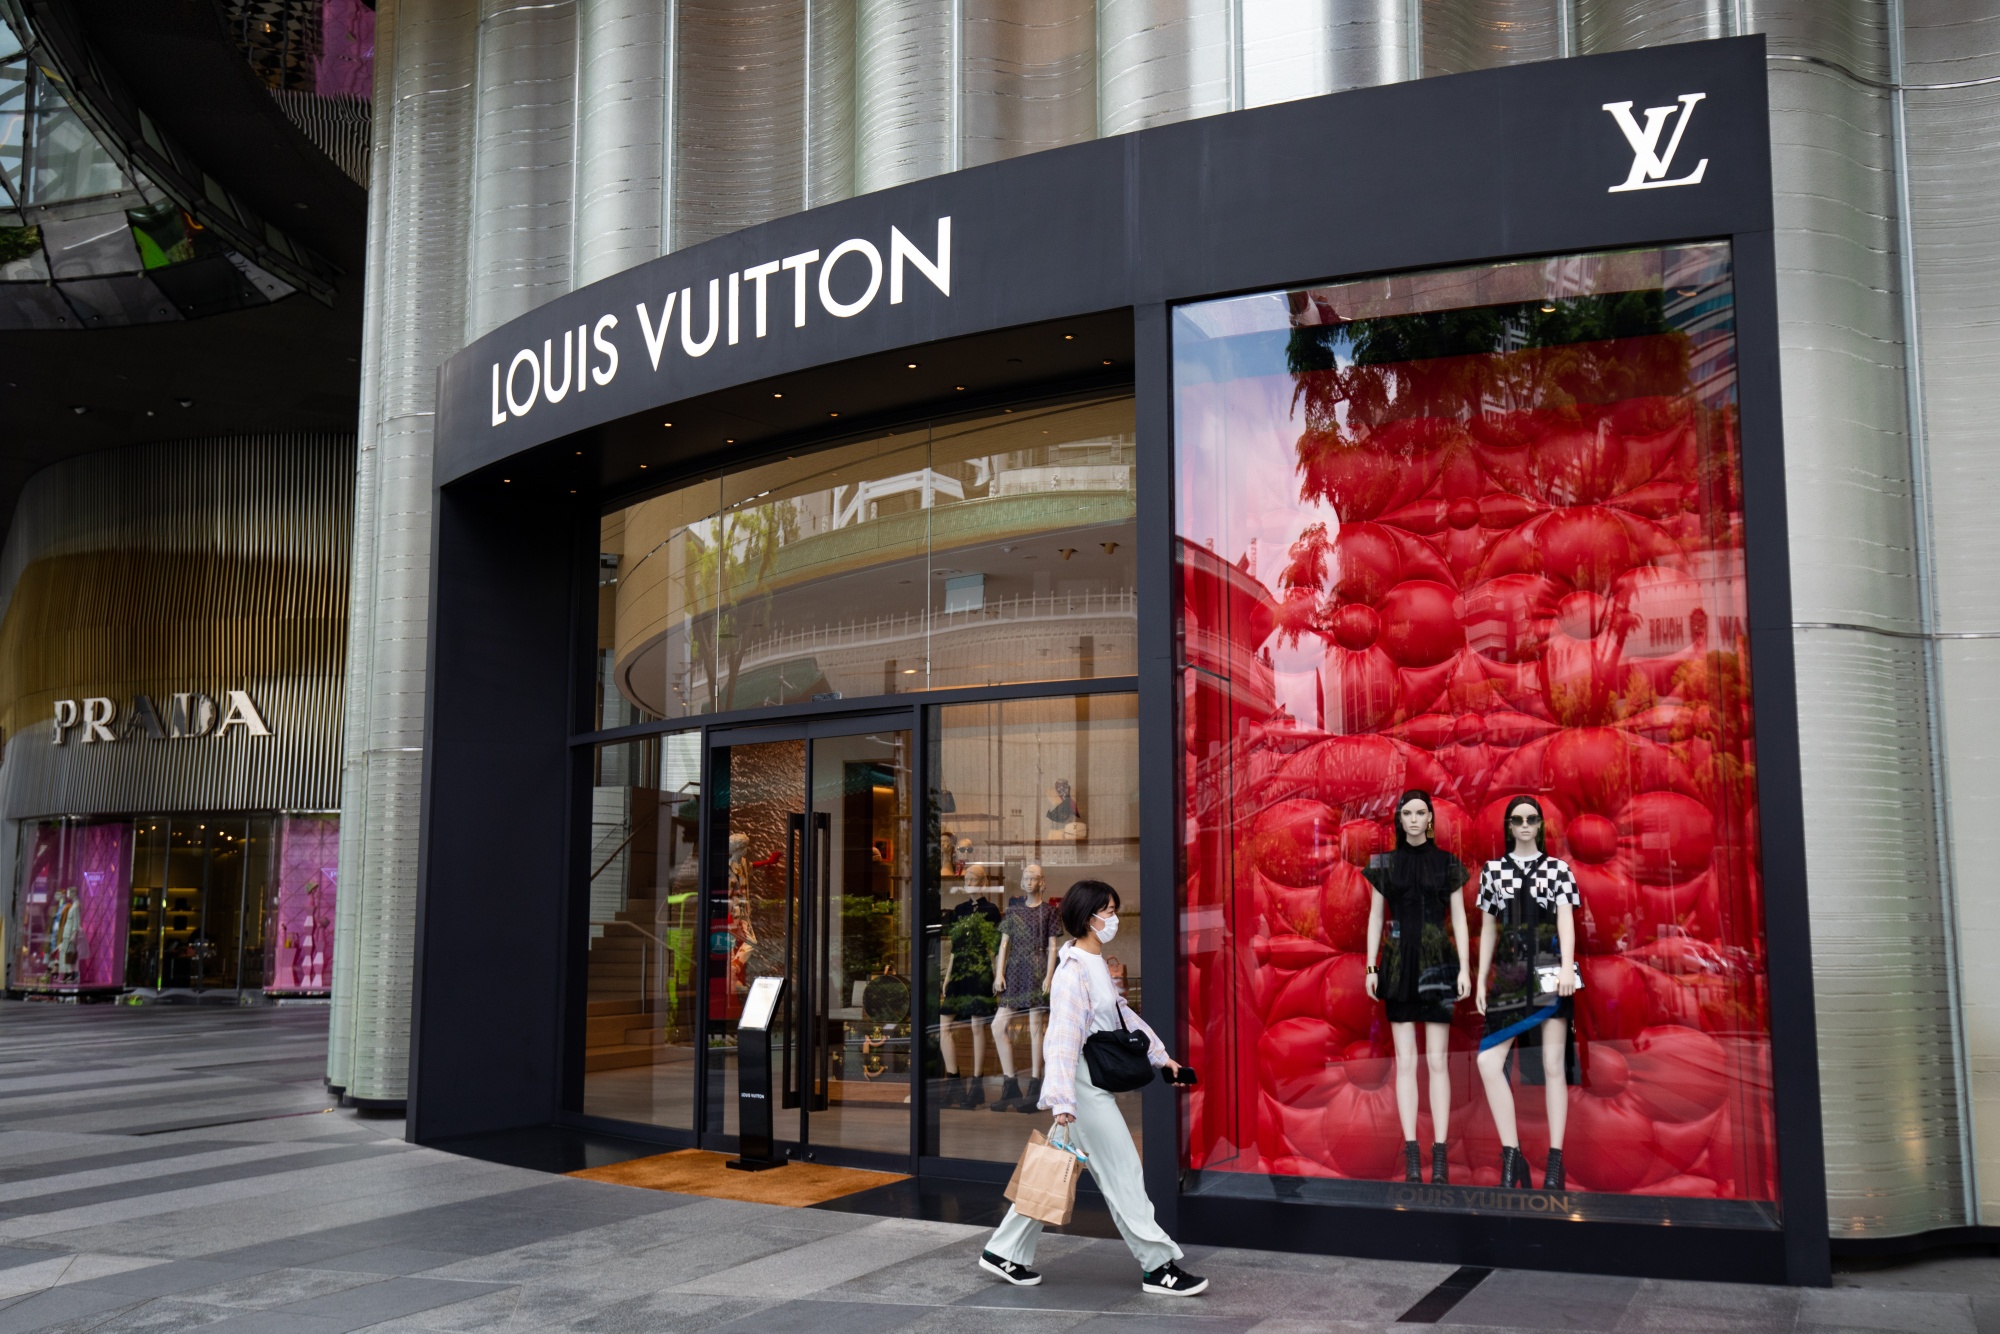 SINGAPORE -NOVEMBER 18: Louis Vuitton Store At ION Orchard